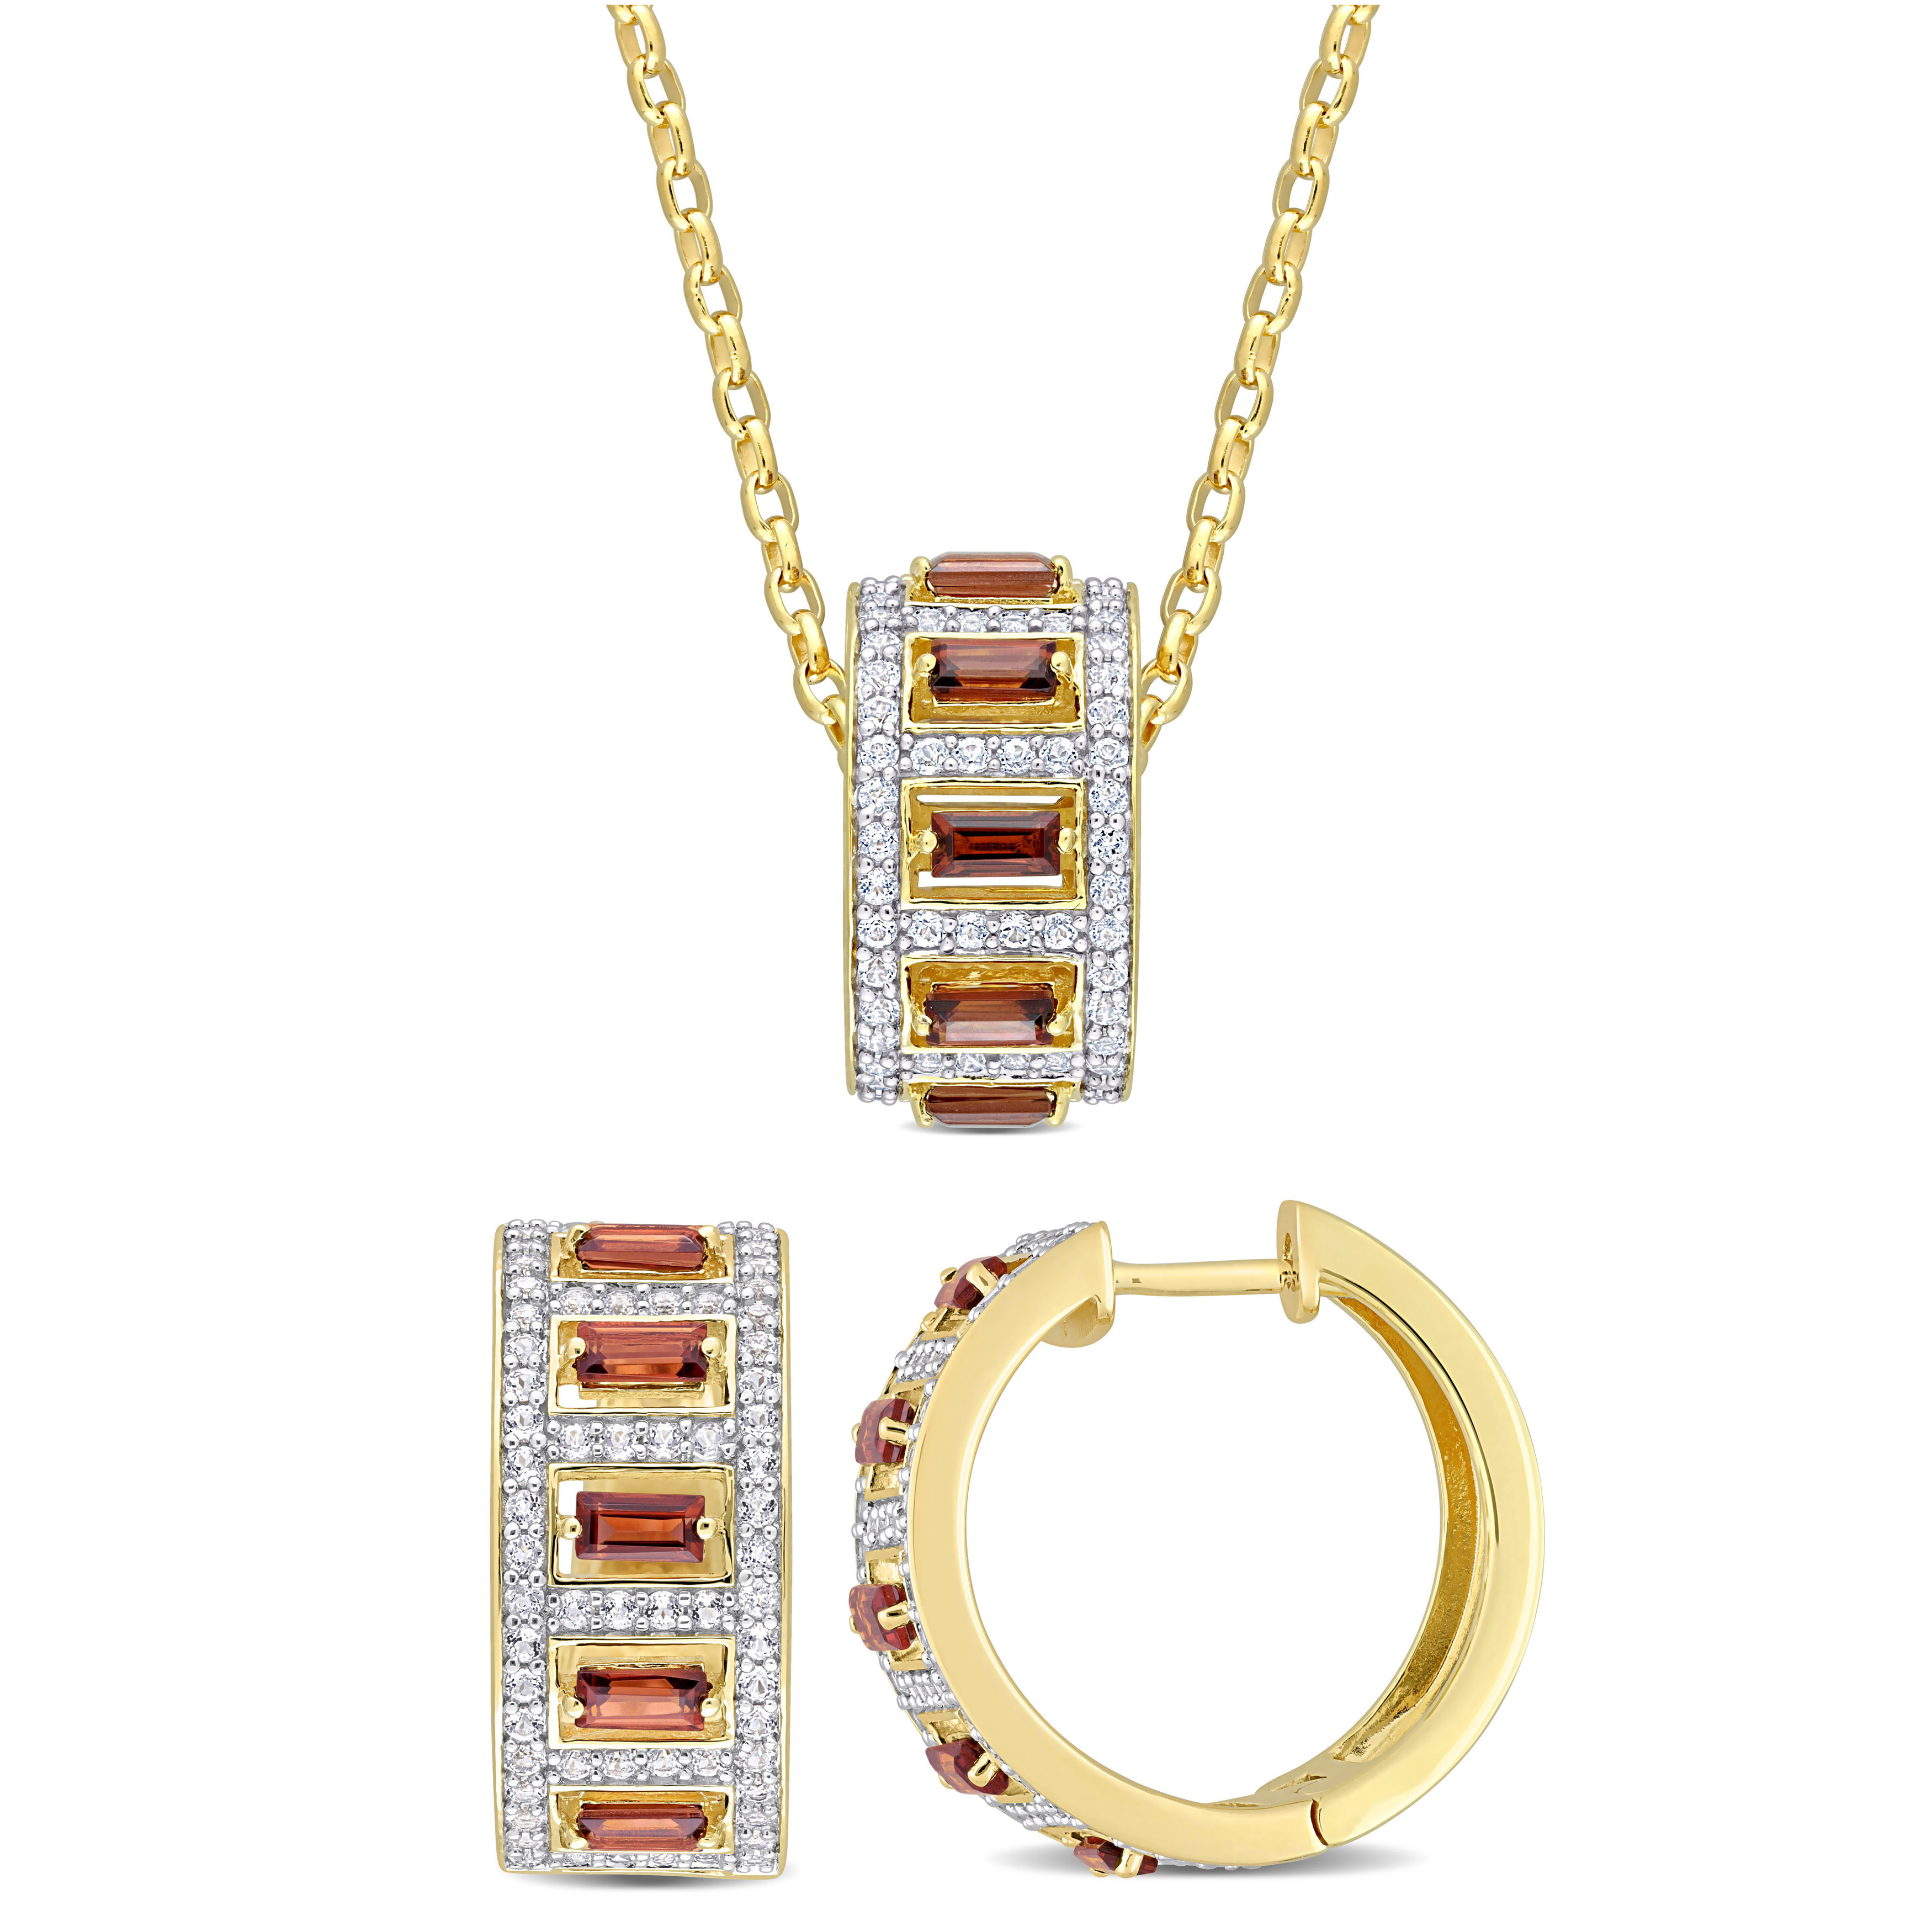 5 3/4 CT TGW Baguette-Cut Garnet and Created White Sapphire 2-Piece Eternity Design Necklace and Earrings Set in Yellow Plated Sterling Silver